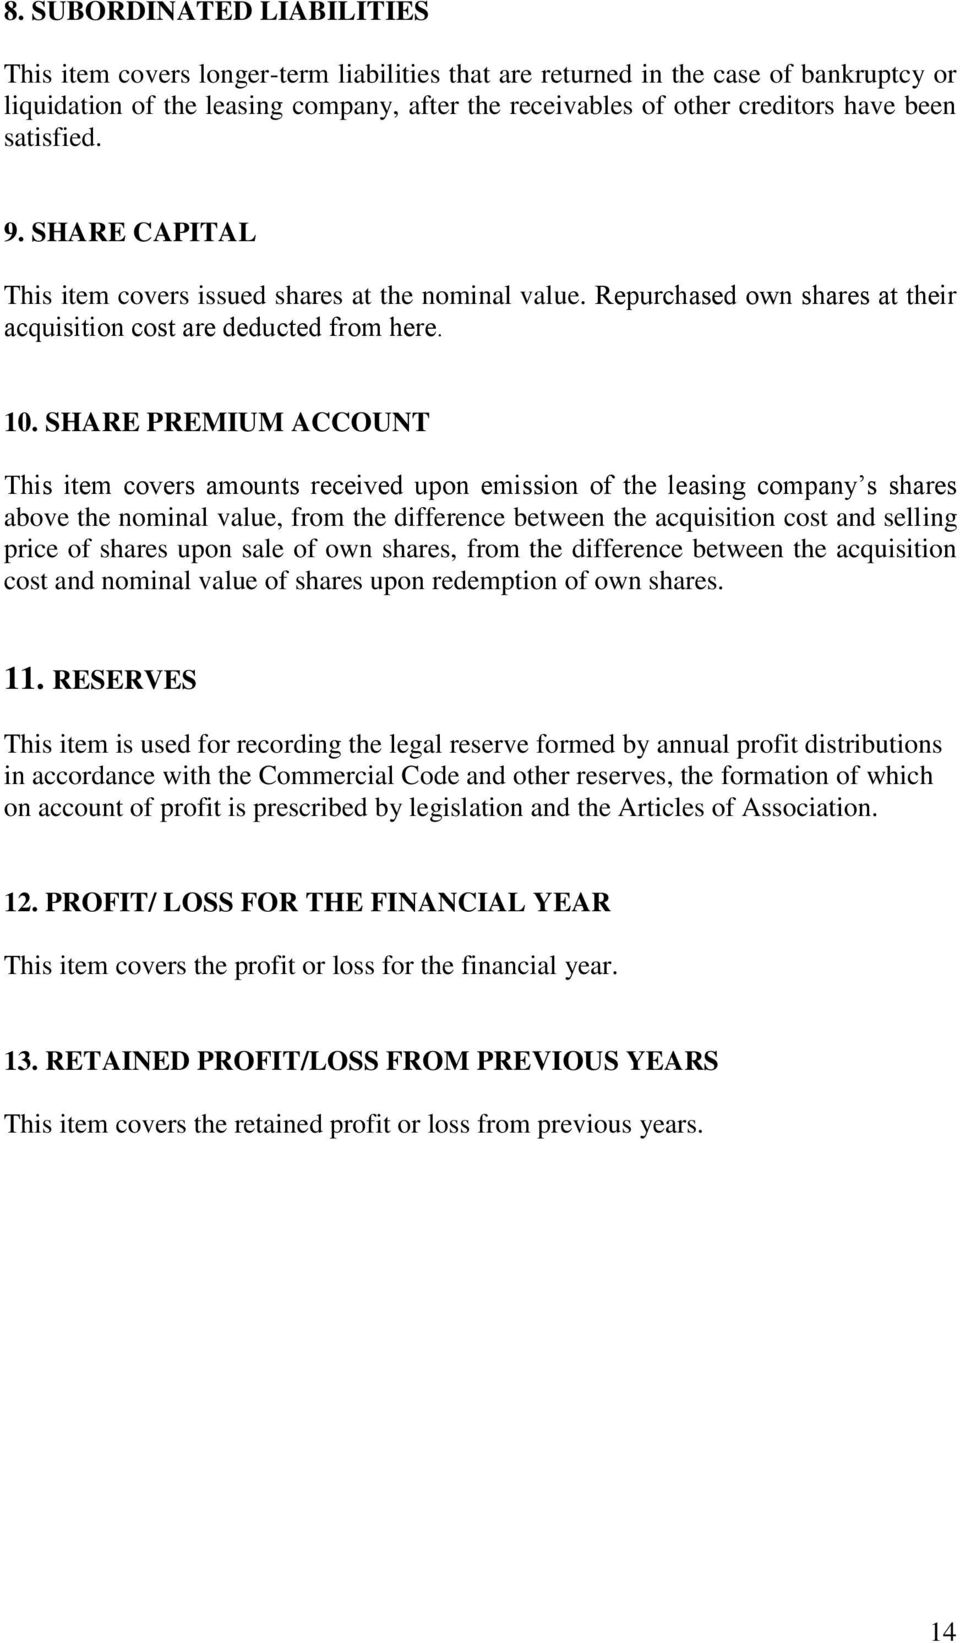 SHARE PREMIUM ACCOUNT This item covers amounts received upon emission of the leasing company s shares above the nominal value, from the difference between the acquisition cost and selling price of